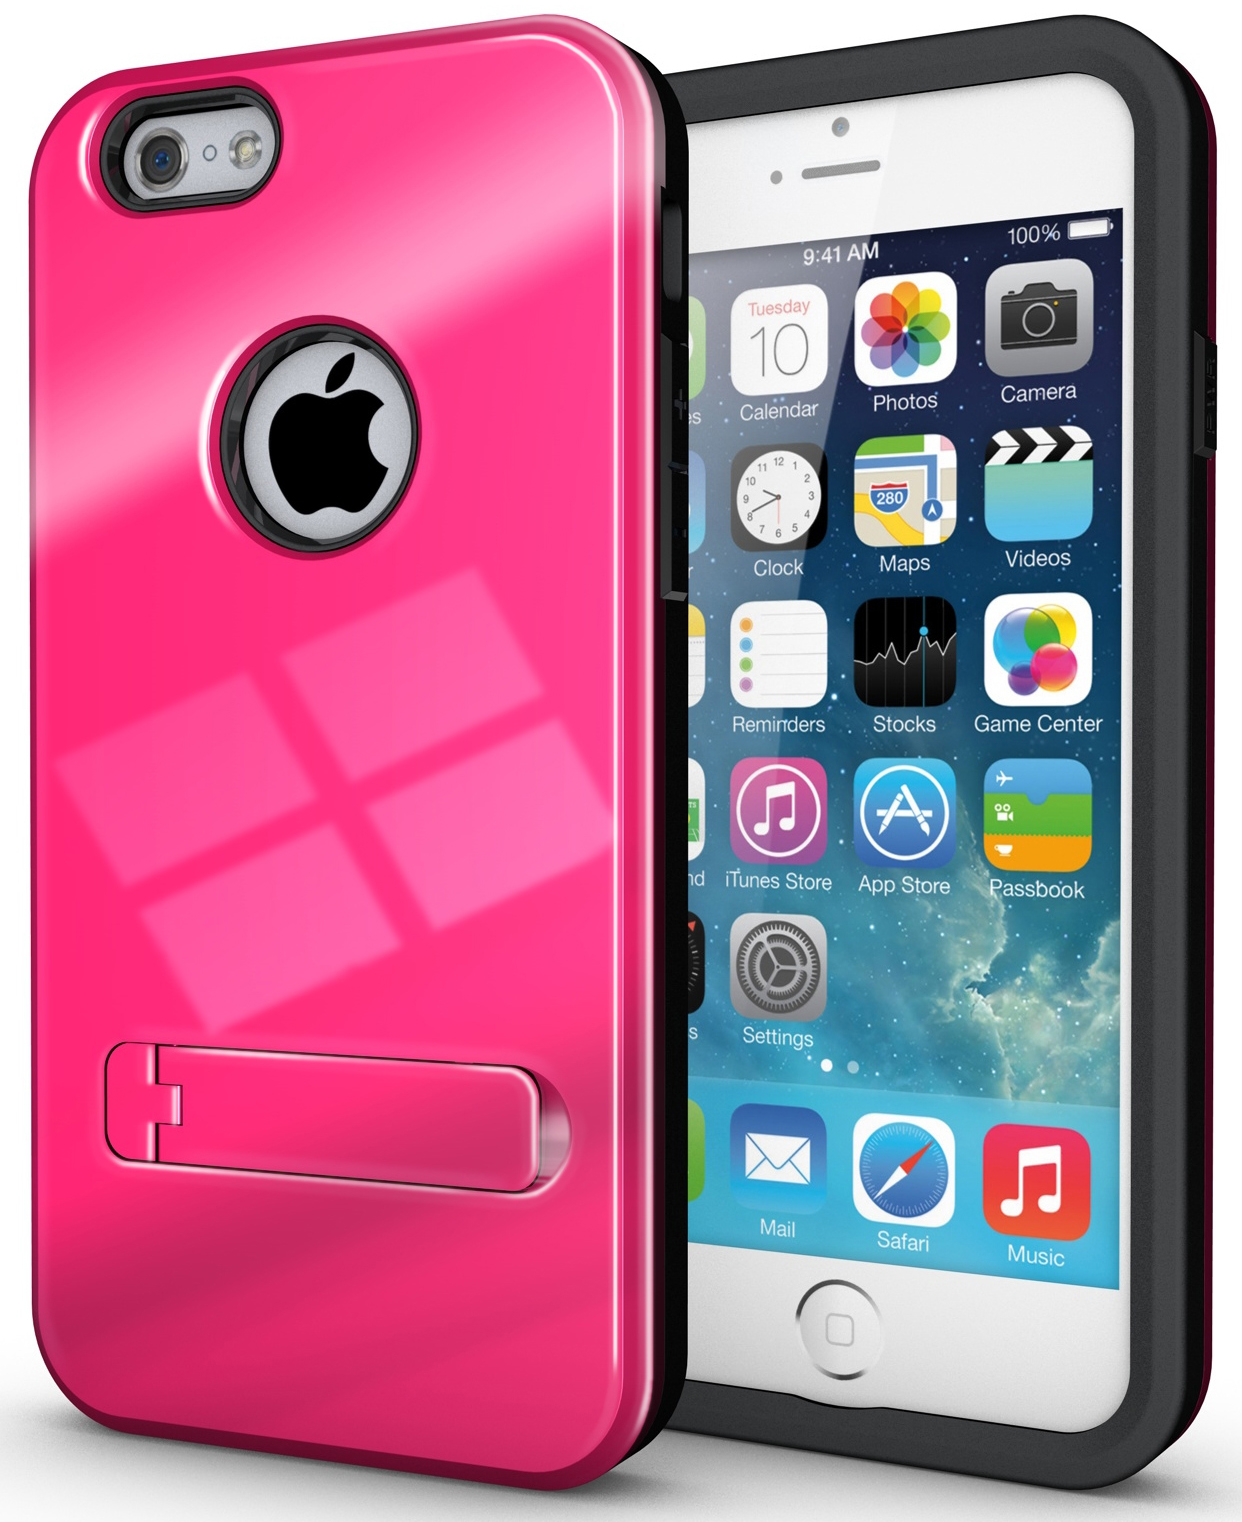 Nakedcellphone HOT PINK SLIM TOUGH SHIELD GLOSSY ARMOR HYBRID CASE COVER SKIN FOR iPHONE 6 4.7"